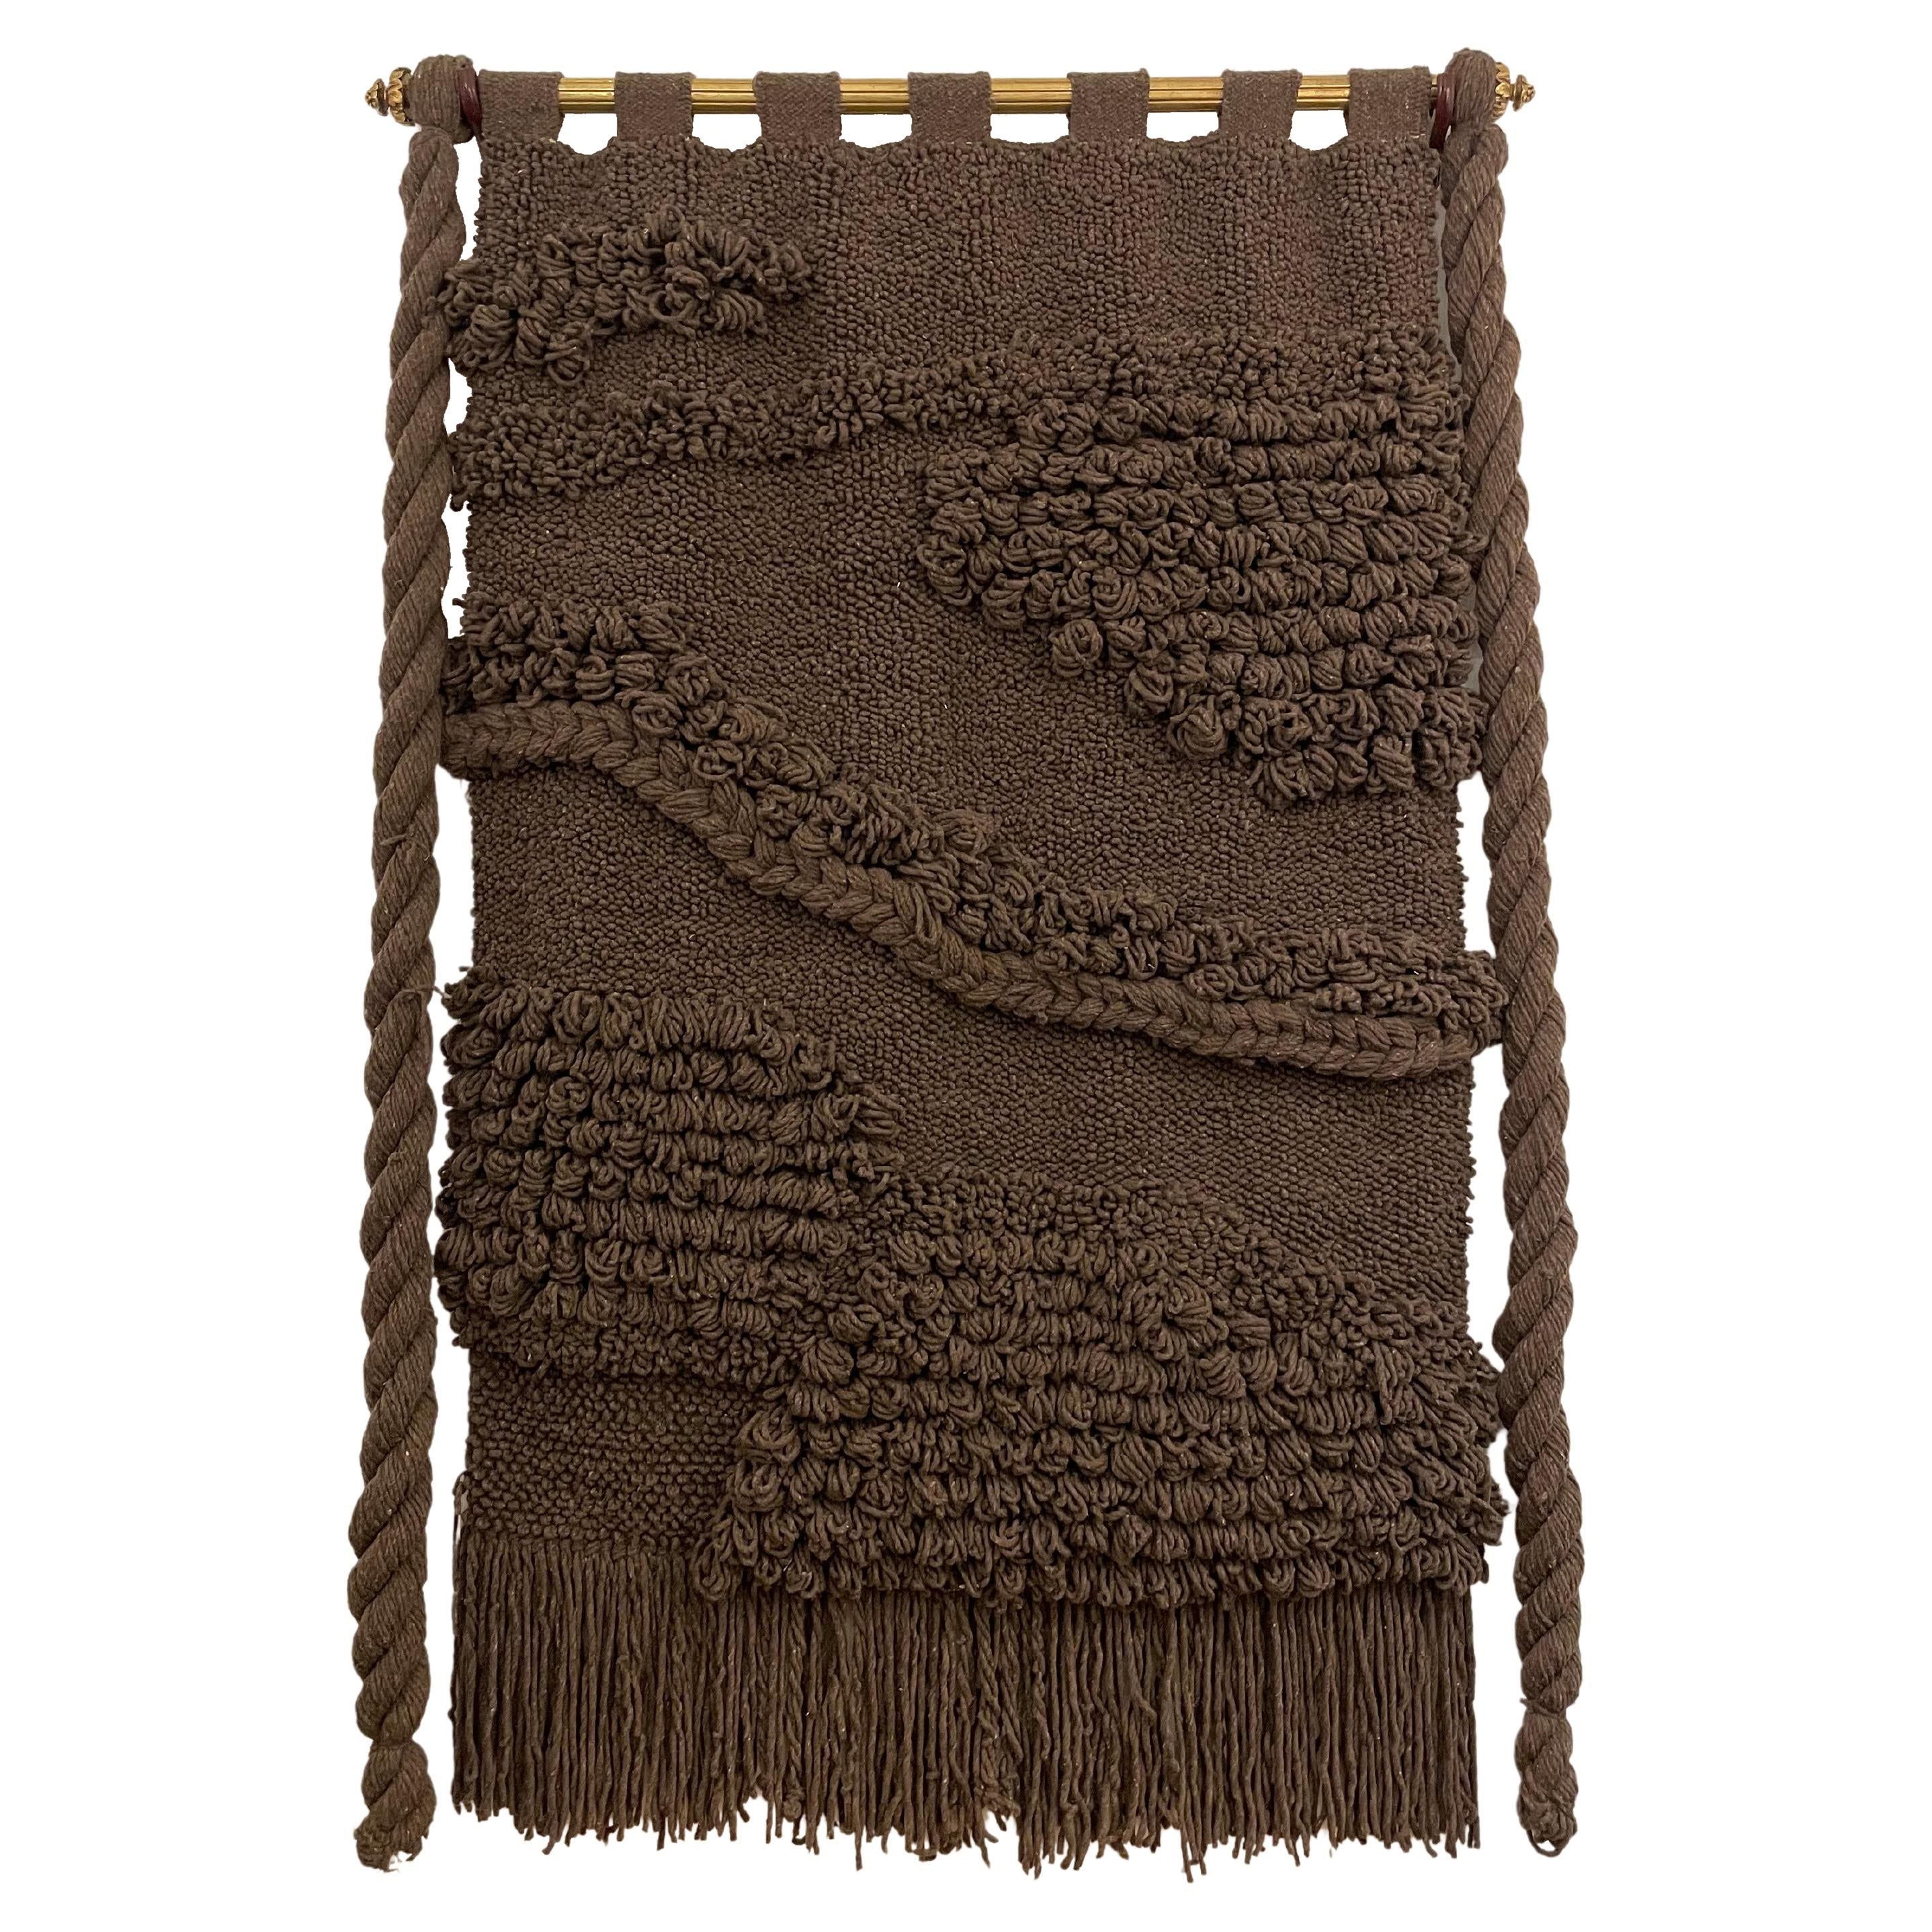 Huge Hand Woven Wool Wall Tapestry in Chocolate/Charcoal Tone